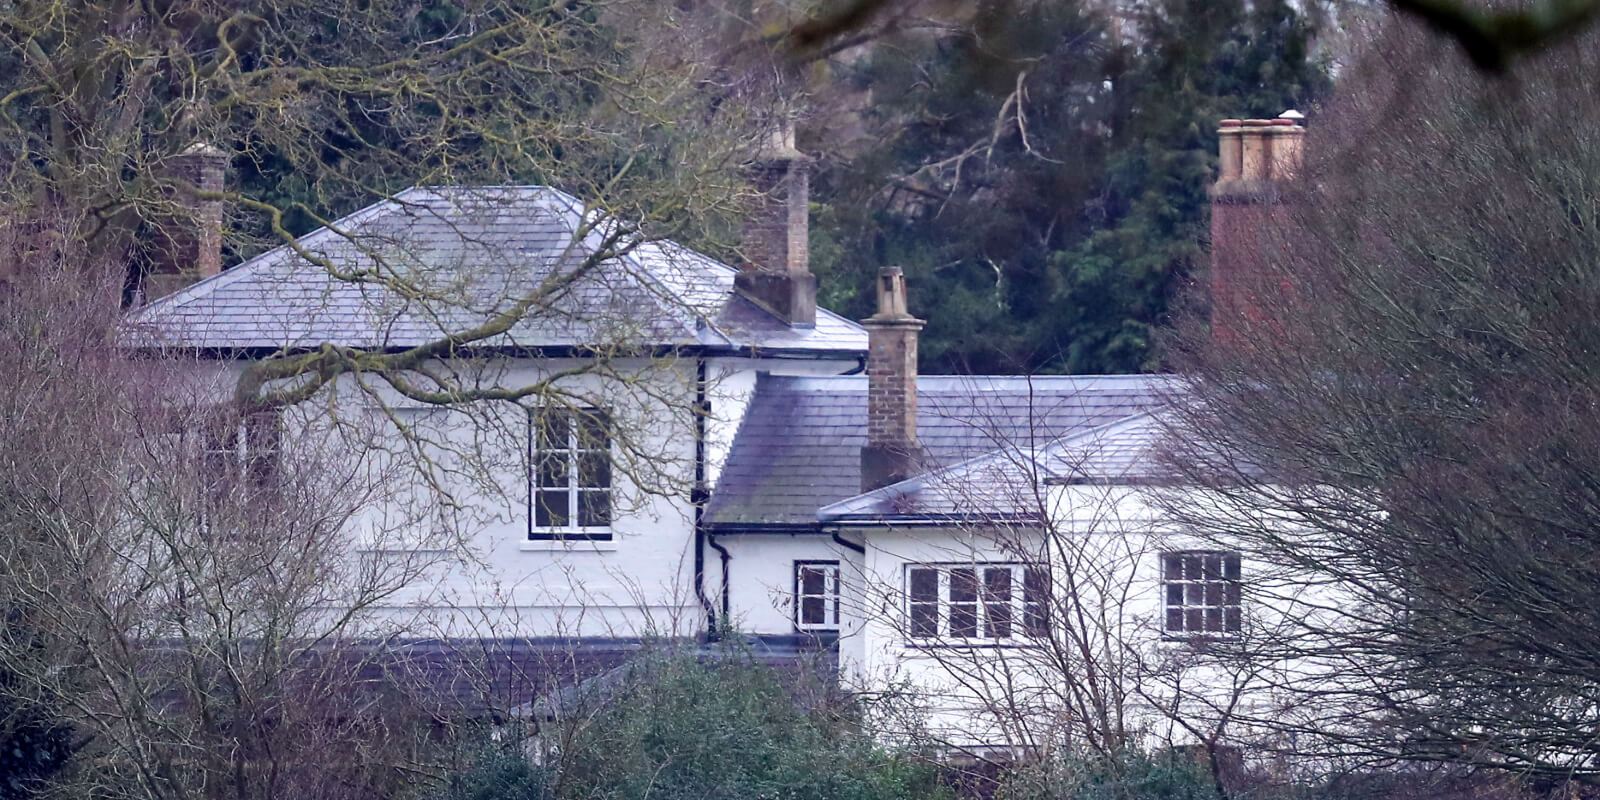 Frogmore Cottage, the former home of Prince Harry and Meghan Markle, taken in 2020.